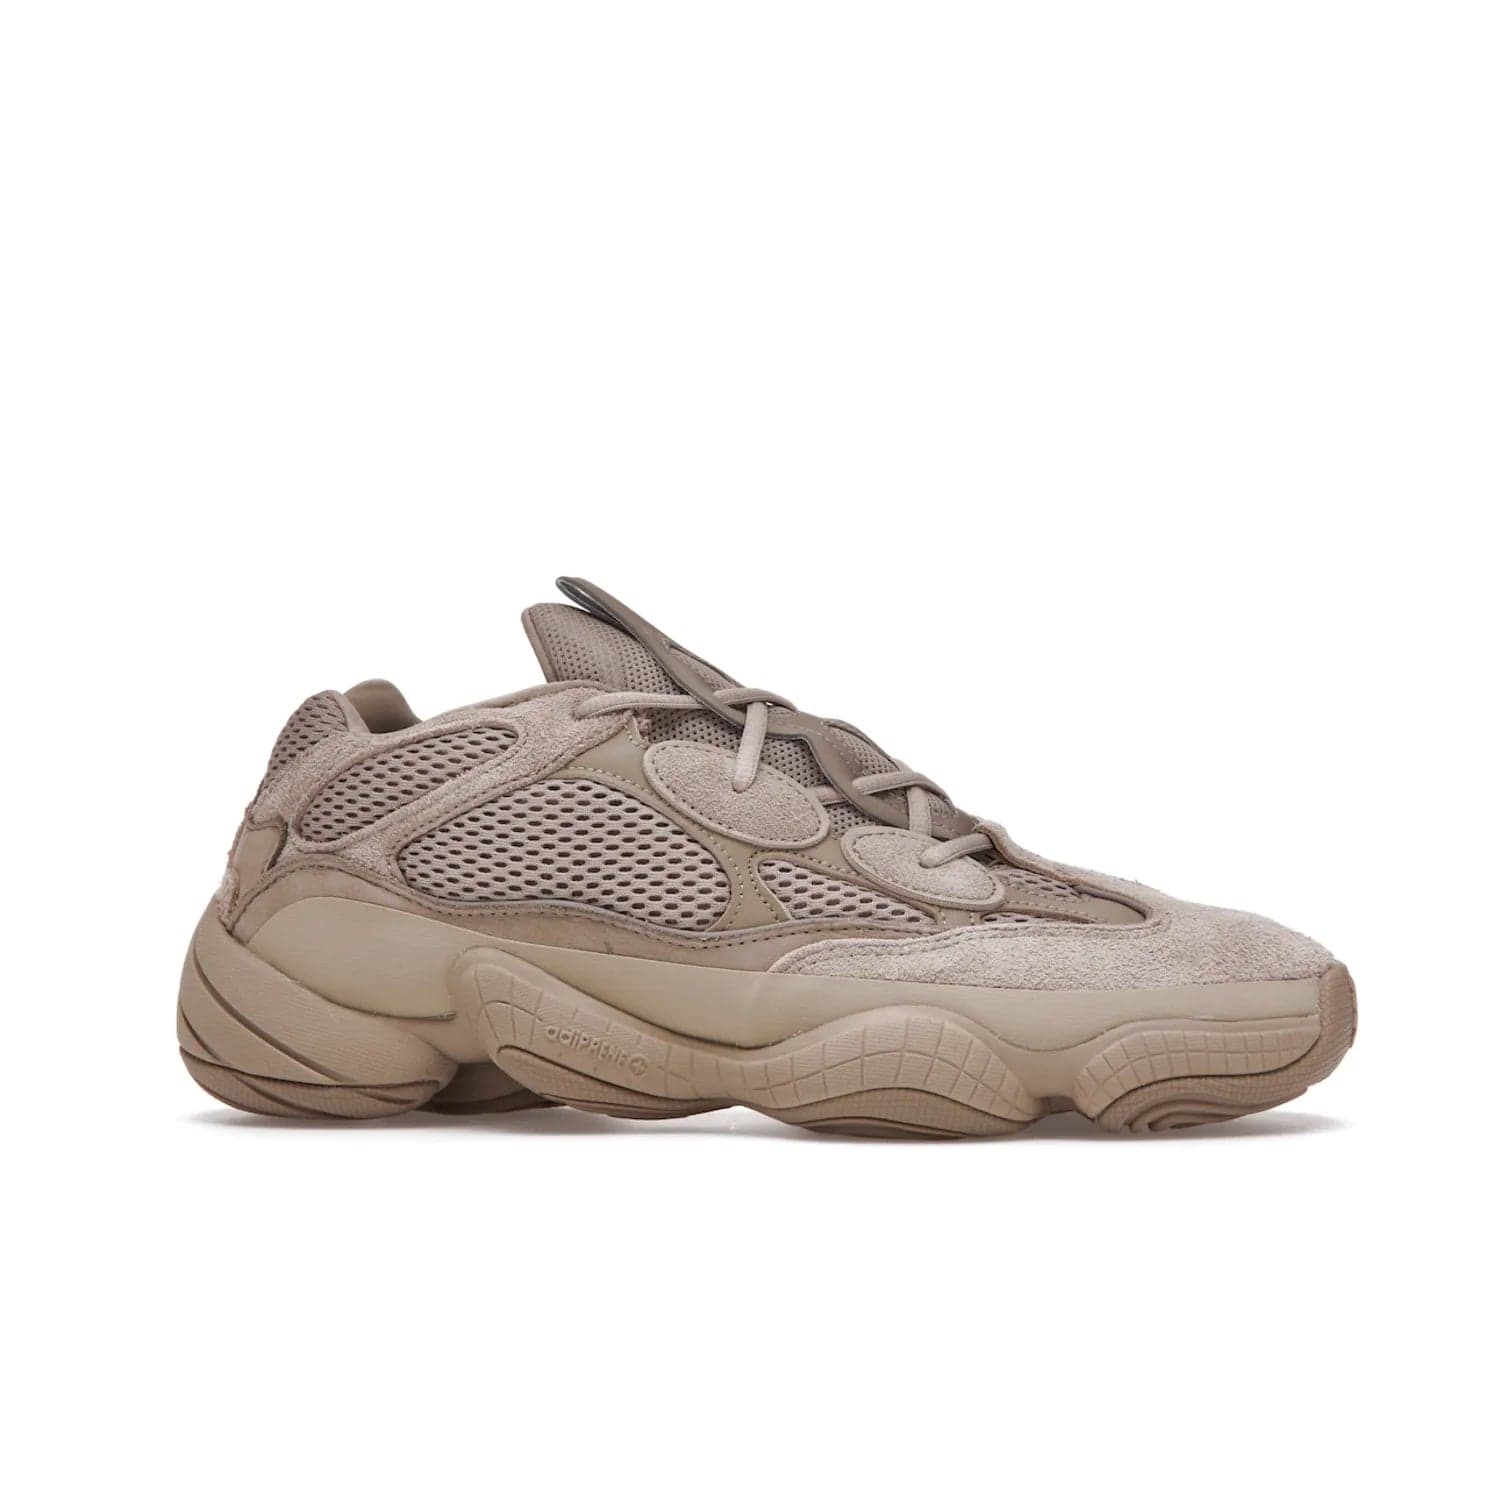 adidas Yeezy 500 Taupe Light - Image 2 - Only at www.BallersClubKickz.com - The adidas Yeezy 500 Taupe Light combines mesh, leather, and suede, with a durable adiPRENE sole for an eye-catching accessory. Reflective piping adds the perfect finishing touches to this unique silhouette. Ideal for any wardrobe, releasing in June 2021.